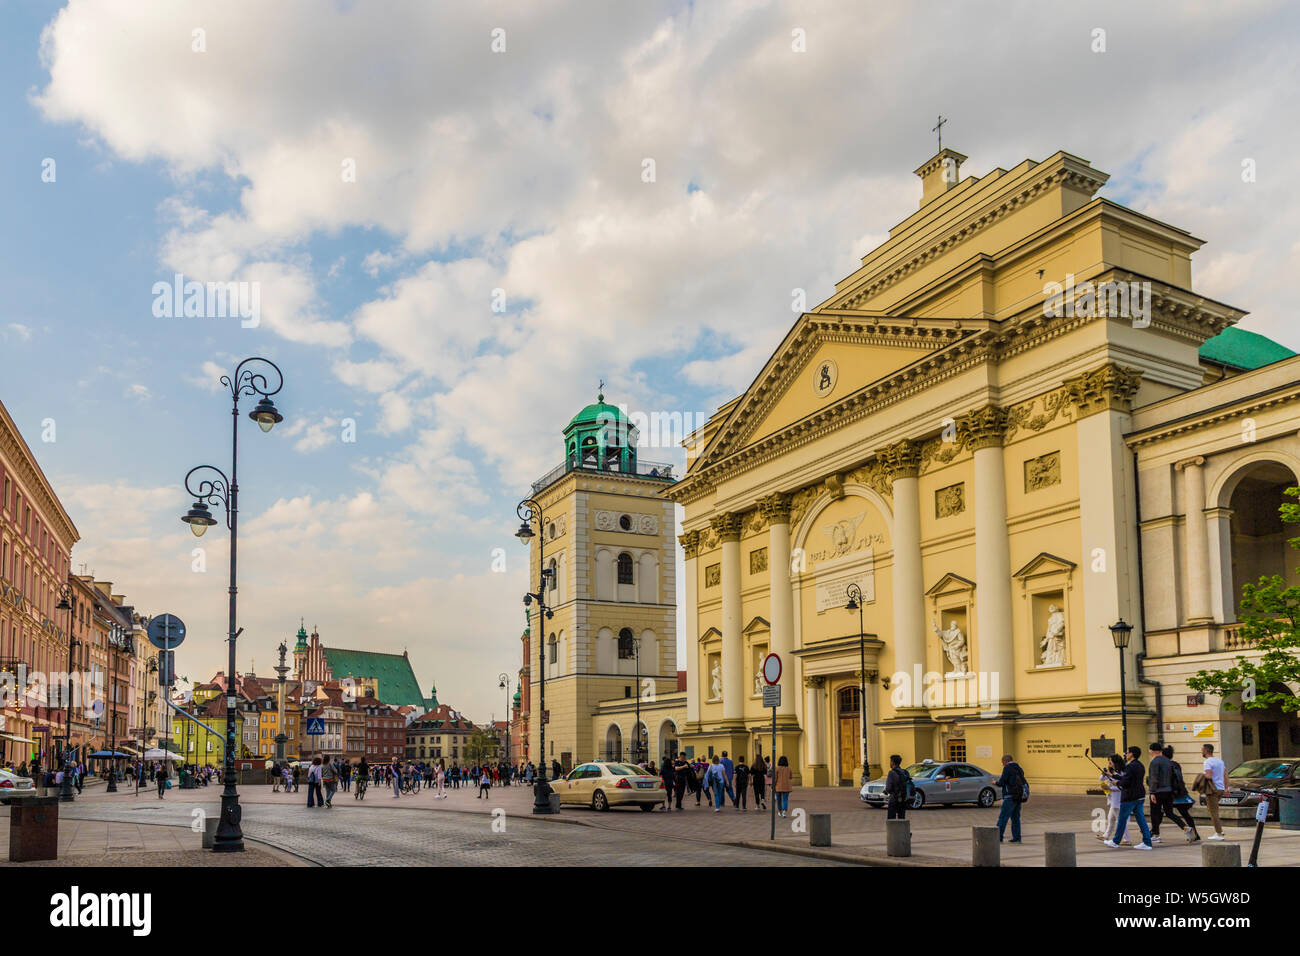 St. Anne's Church in the Old Town, UNESCO World Heritage Site, Warsaw, Poland, Europe Stock Photo